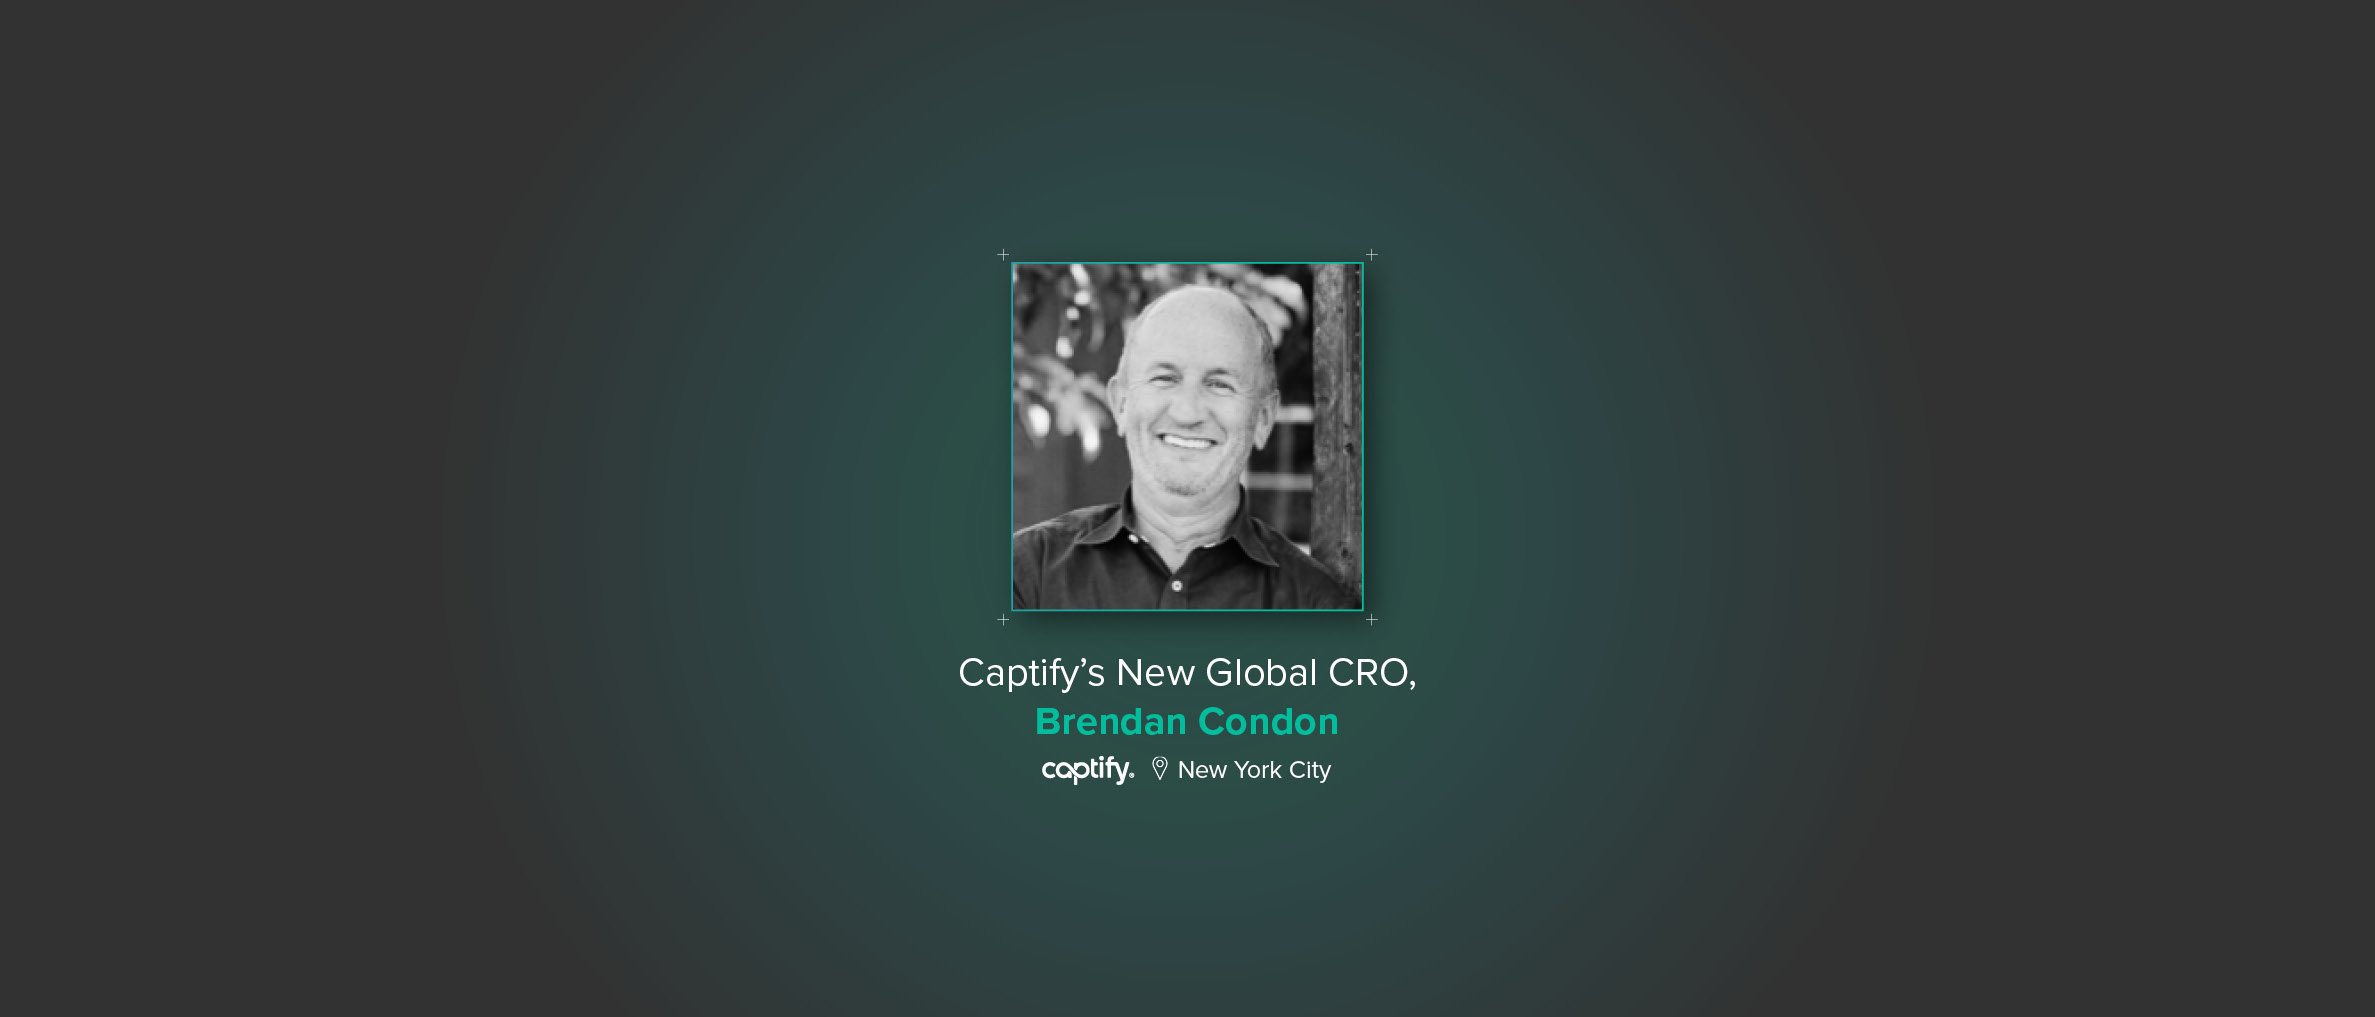 Comcast Executive Brendan Condon Joins Search Intelligence Company Captify as Global CRO